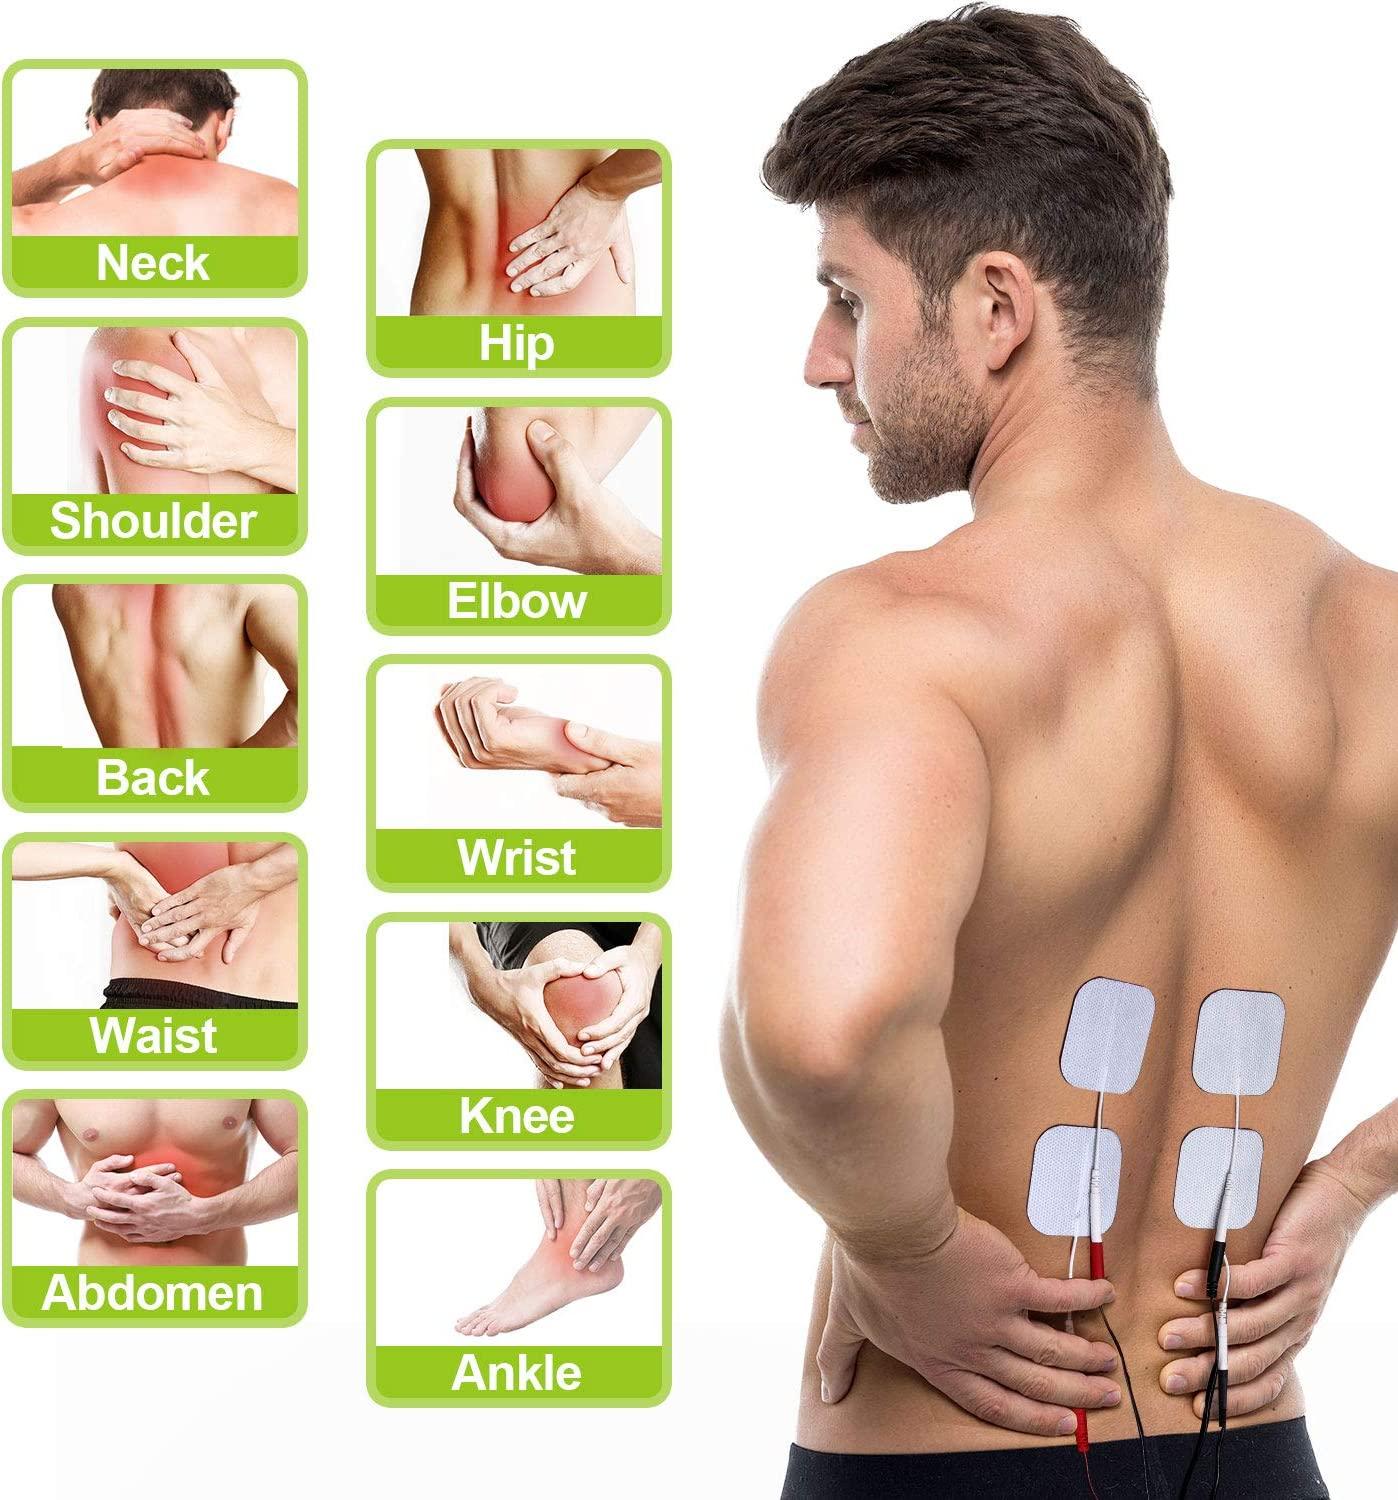 AUVON Rechargeable TENS Unit Muscle Stimulator, 24 Modes 4th Gen TENS  Machine with 8pcs 2x2 Premium Electrode Pads for Pain Relief